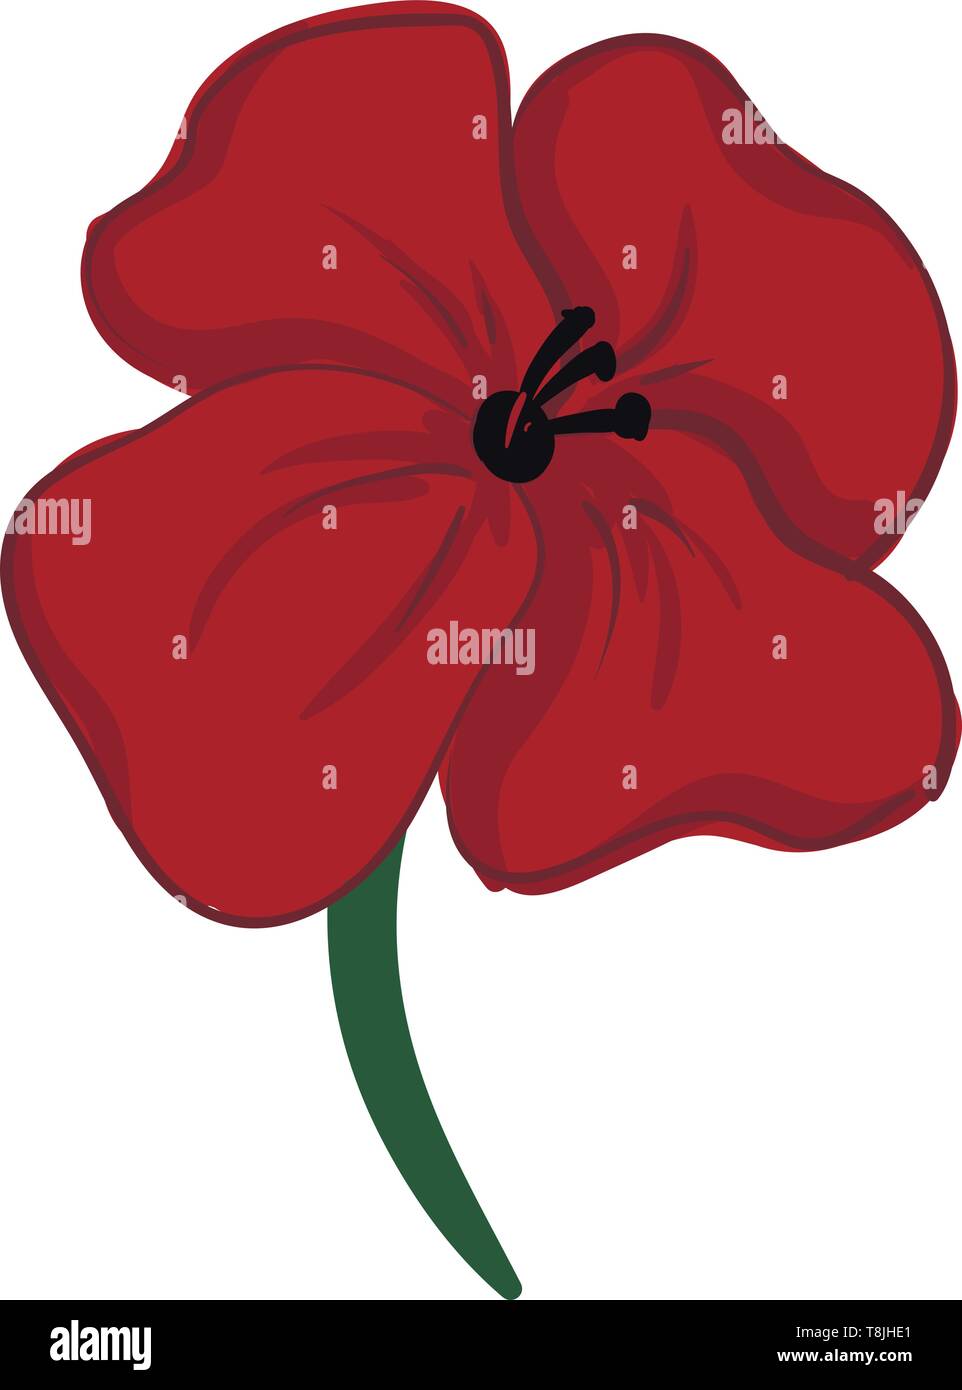 A Painting Of A Red Poppy Flower With Green Stem And Black Pistils Vector Color Drawing Or Illustration Stock Vector Image Art Alamy